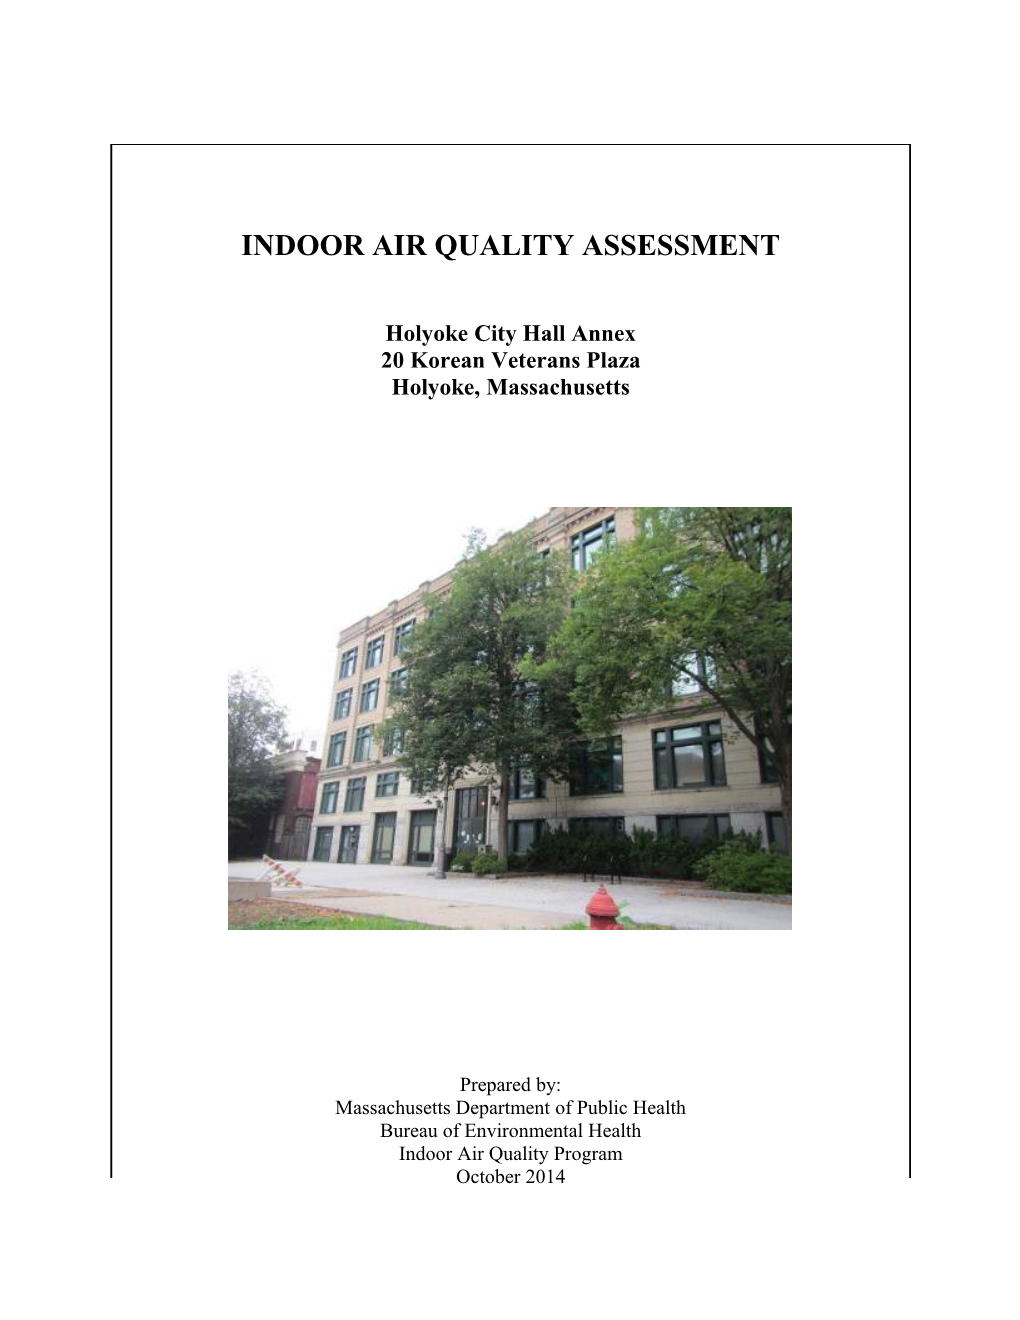 Indoor Air Quality Assessment - Holyoke City Hall Annex